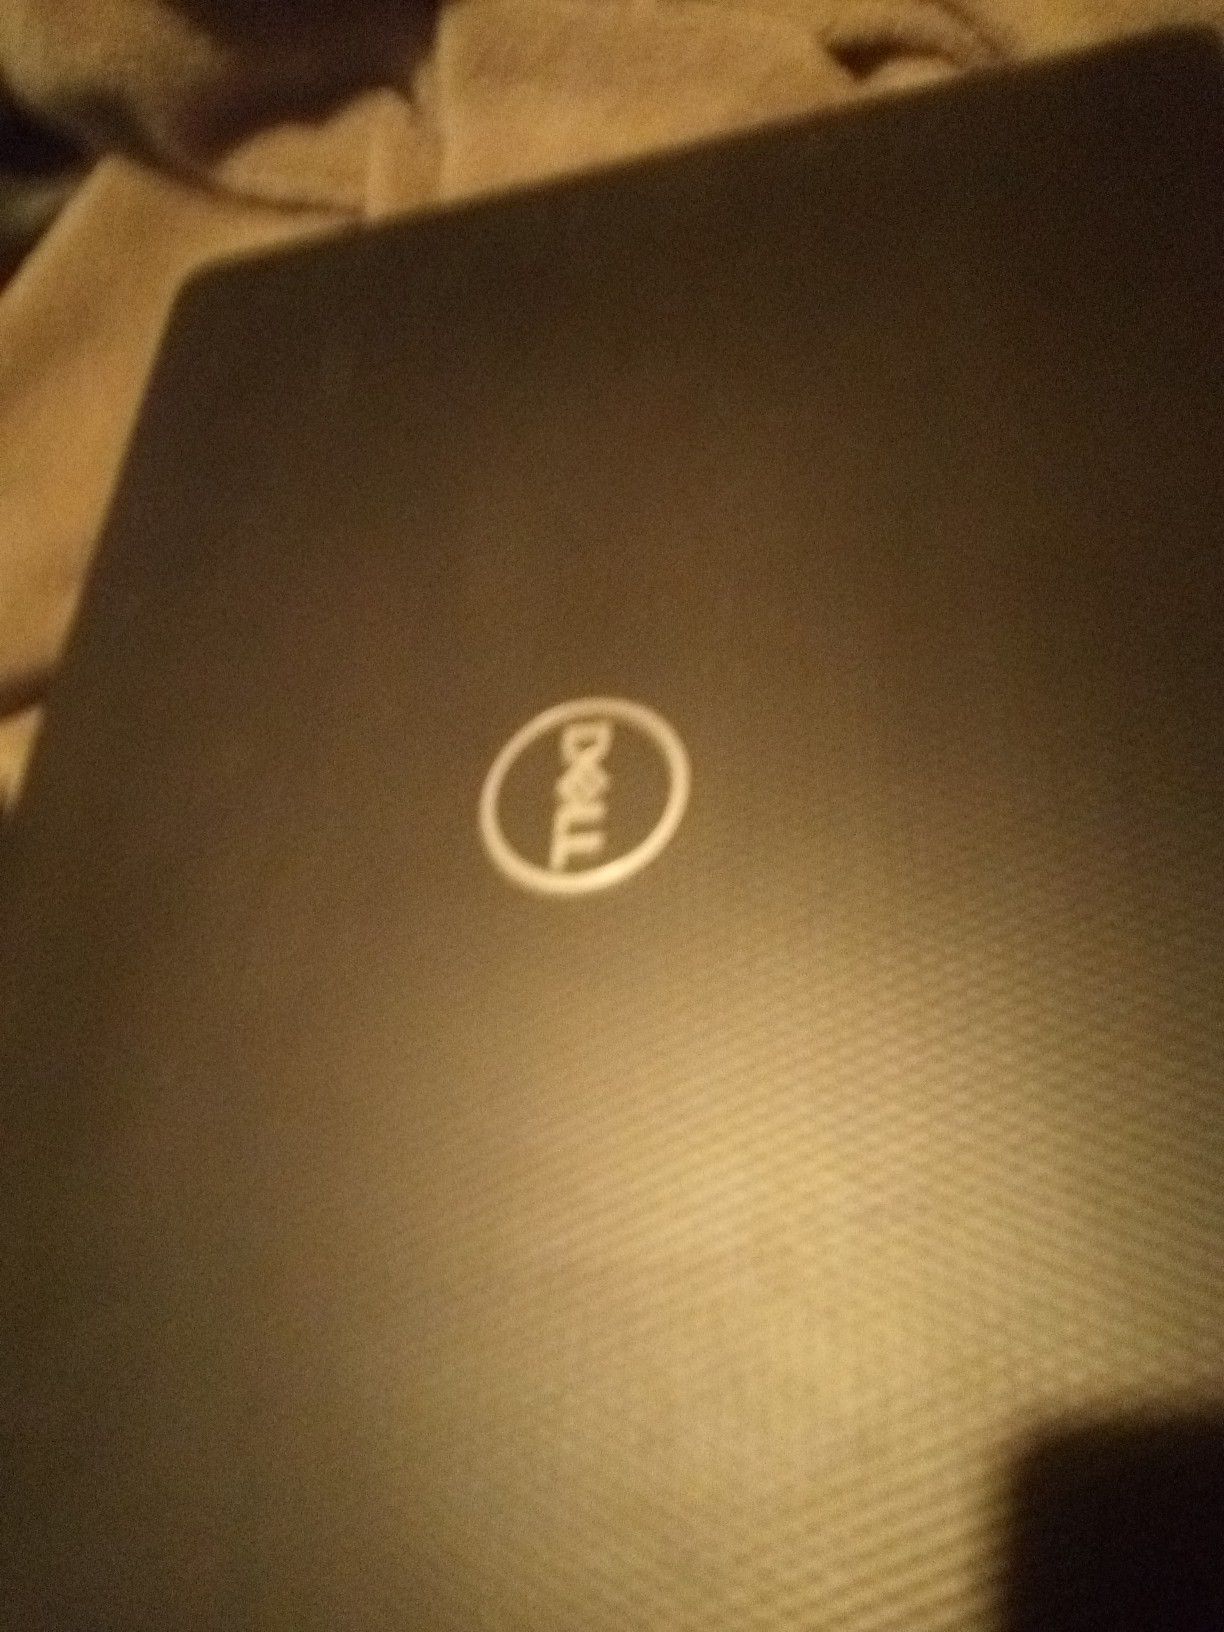 New condition Dell laptop